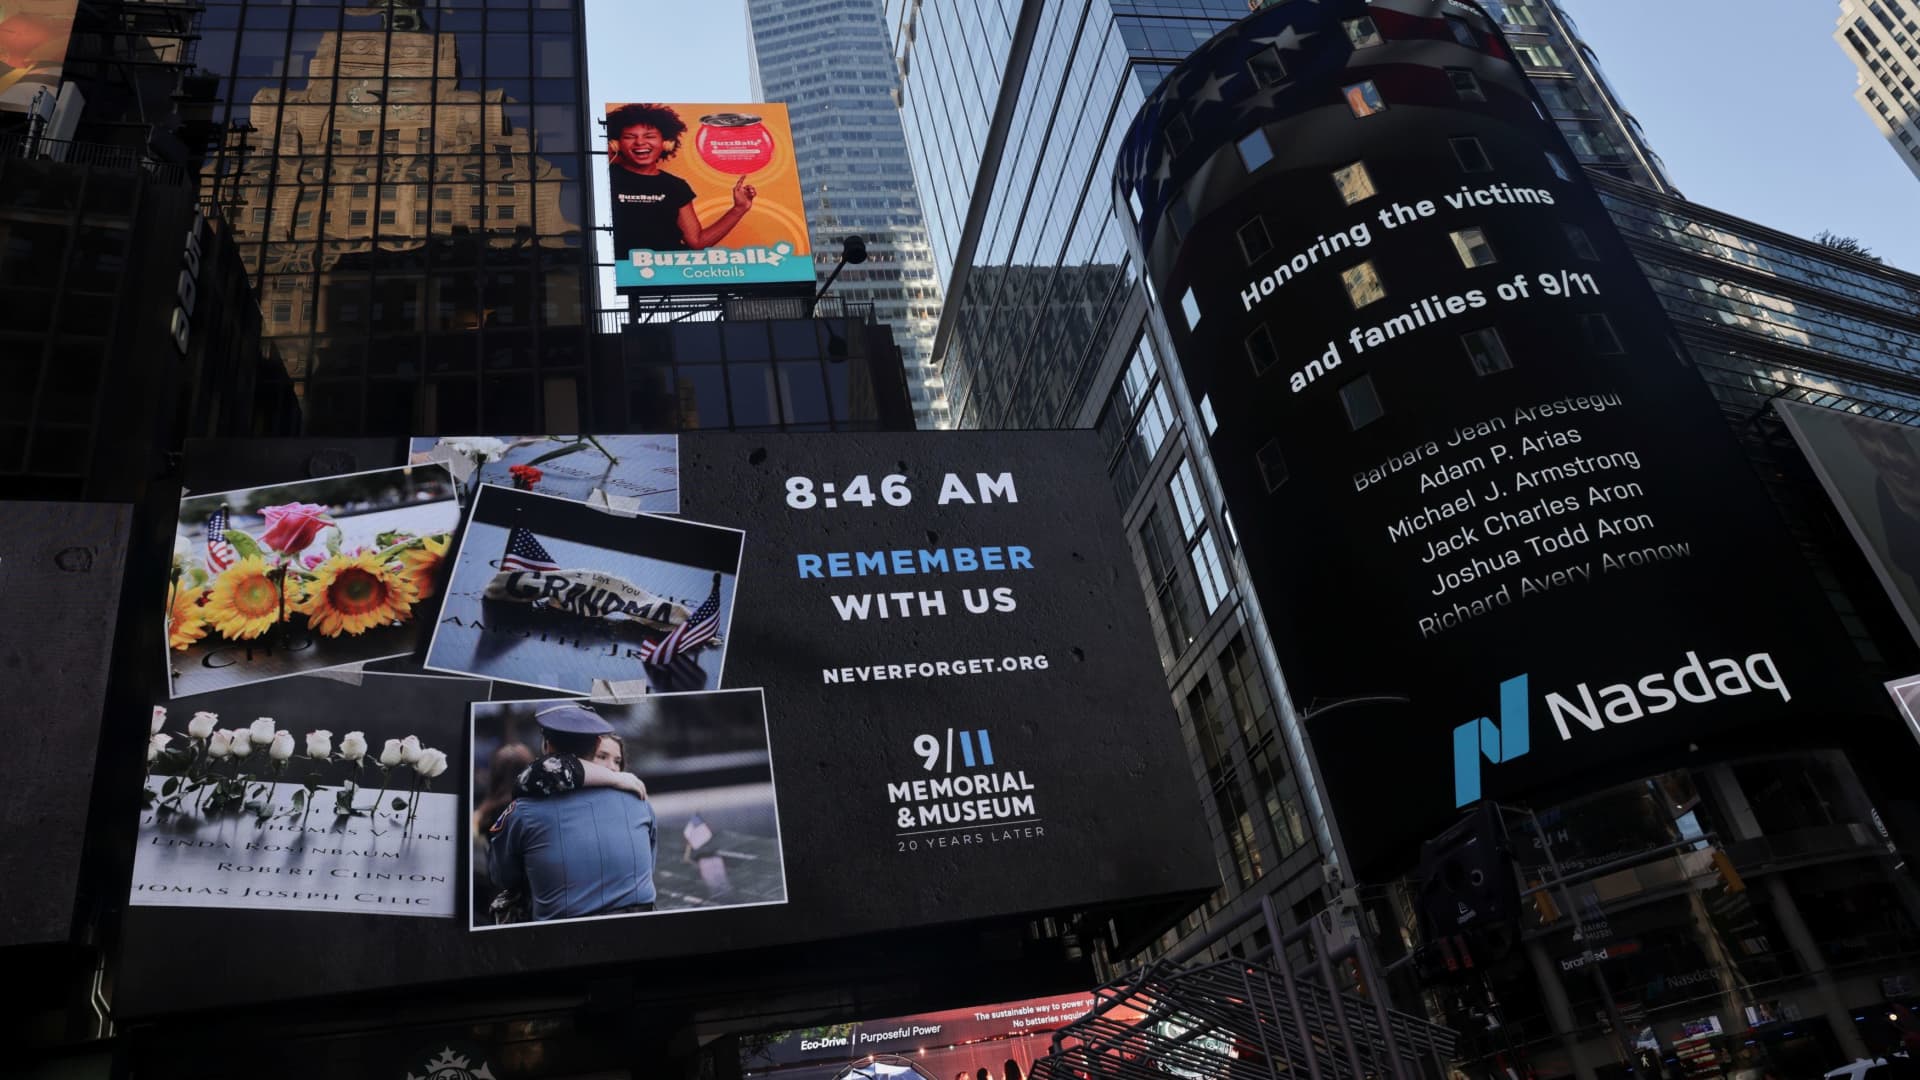 Names of victims of the 9/11 attacks are seen on a screen in Times Square during the 20th anniversary of the September 11, 2001 attacks in New York City, New York, U.S., September 11, 2021.